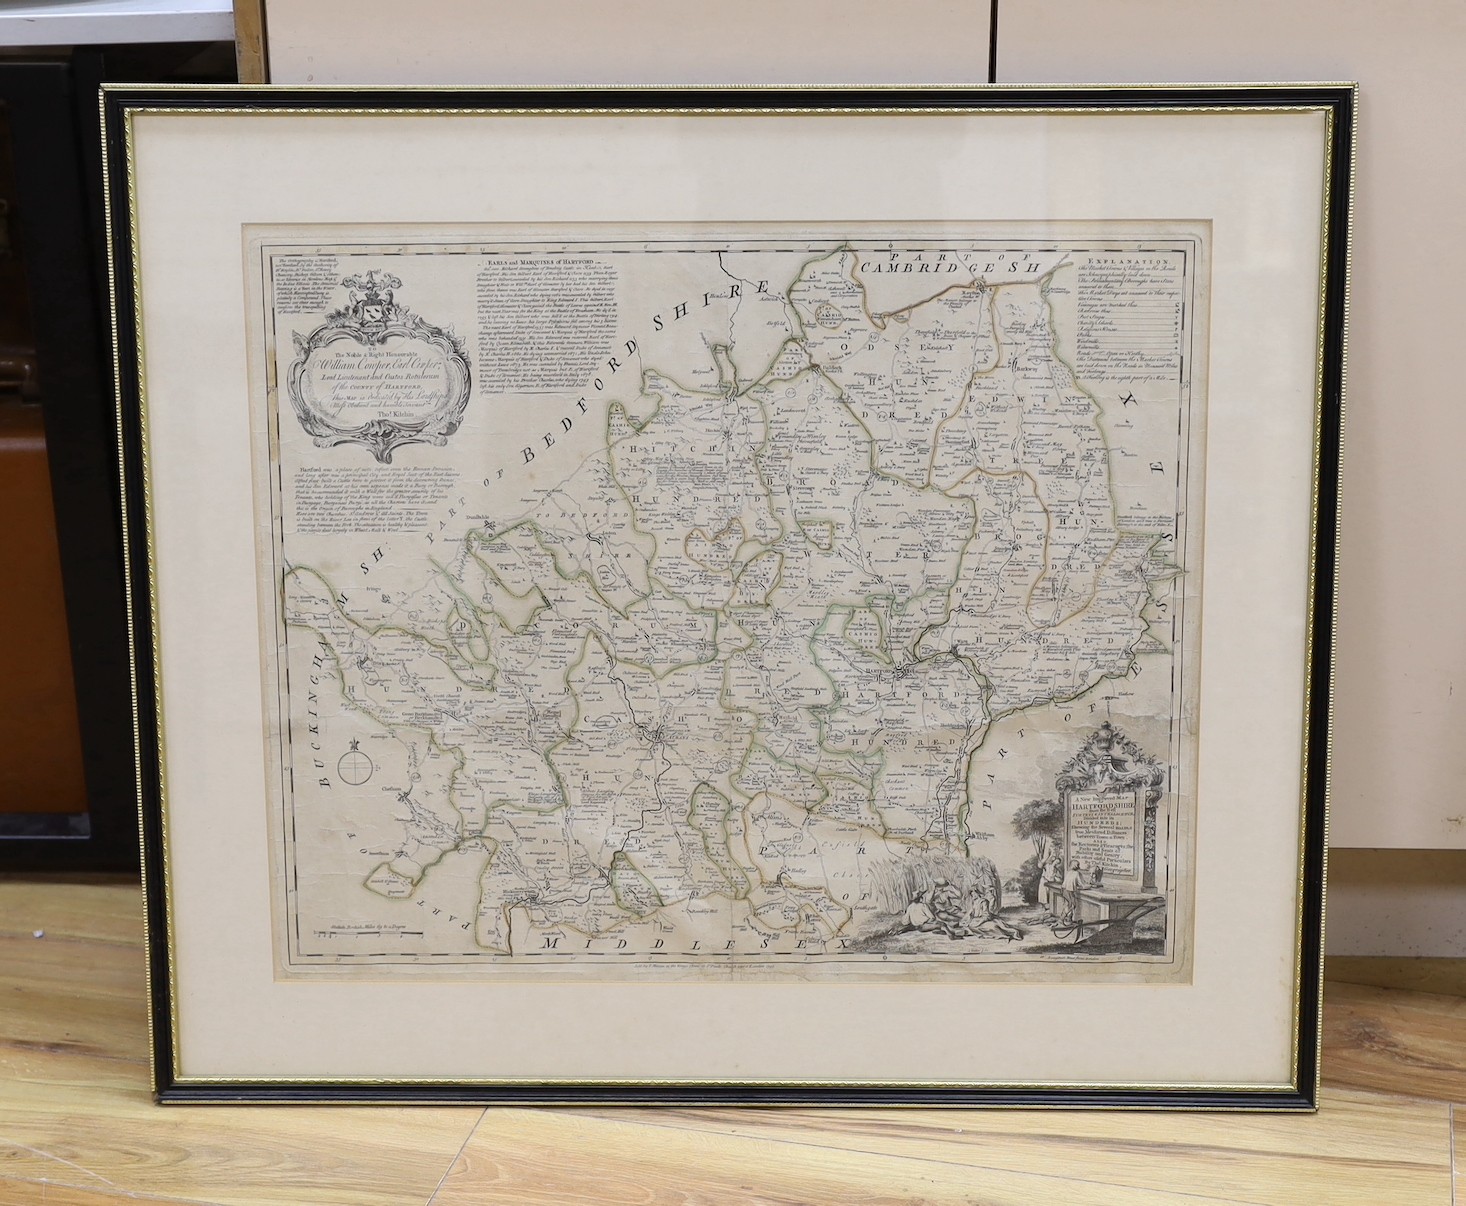 Thomas Kitchin, coloured engraving, A New and Improved Map of Hartfordshire (sic), sold by J. Hinton, London, 1749, 55 x 67cm